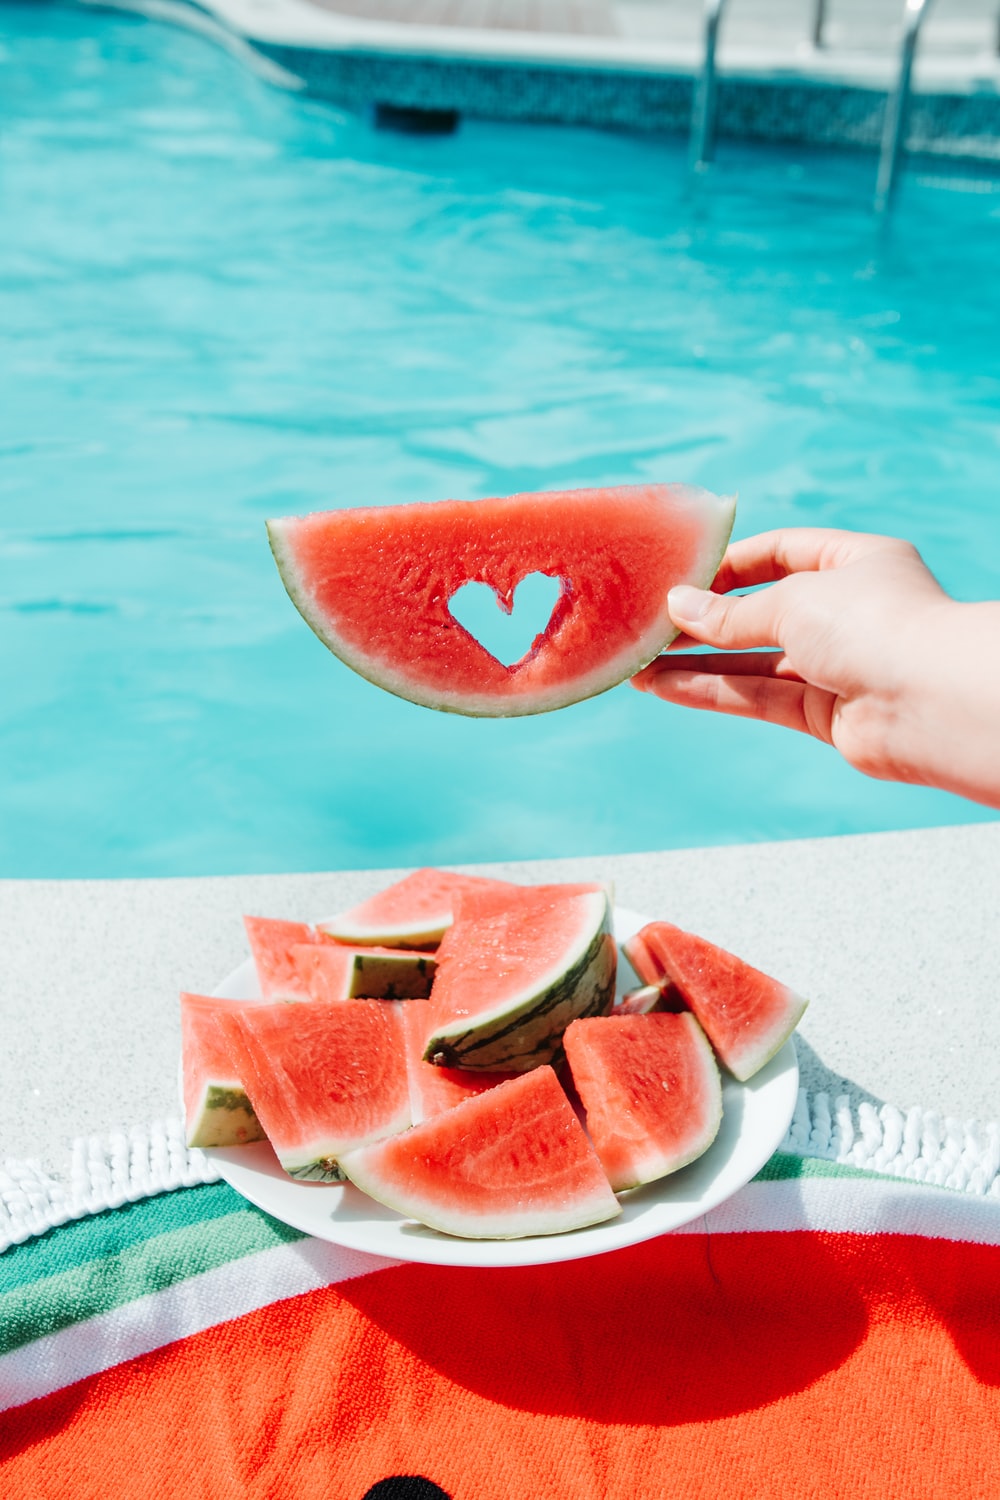 Summer Fruit Picture. Download Free Image